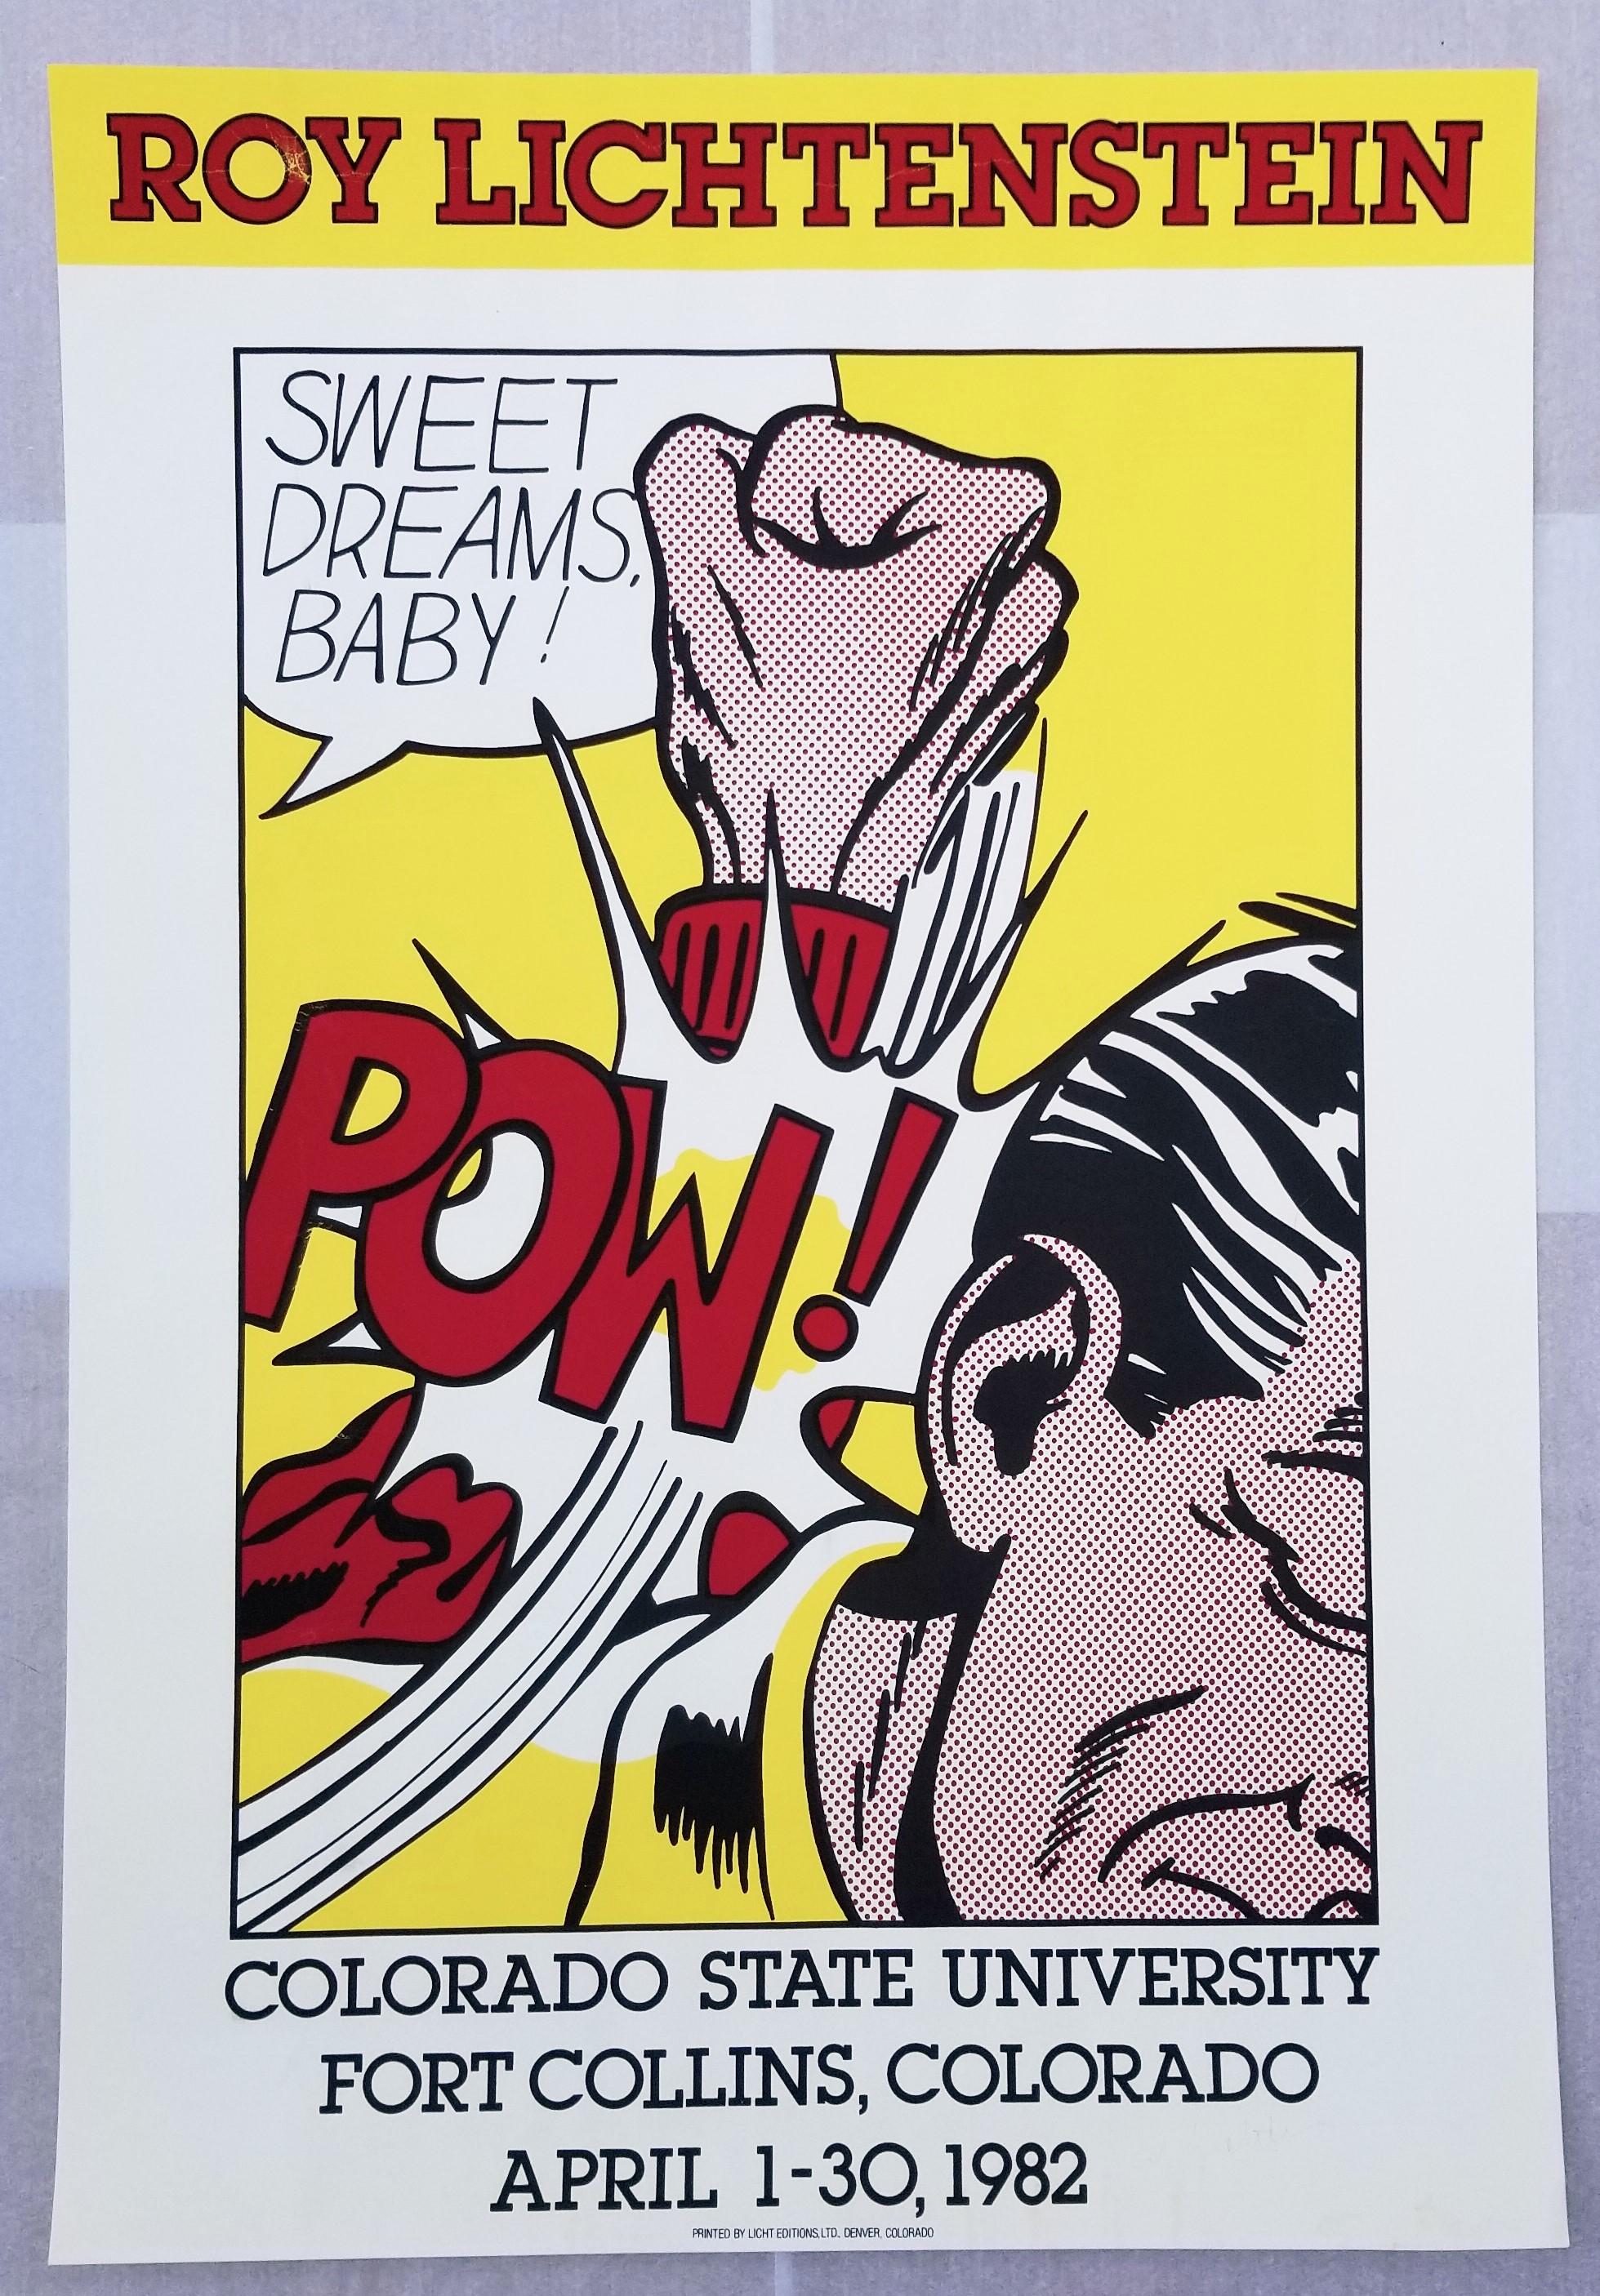 Colorado State University, Fort Collins (Sweet Dreams Baby!) Poster (Signed) - Print by Roy Lichtenstein